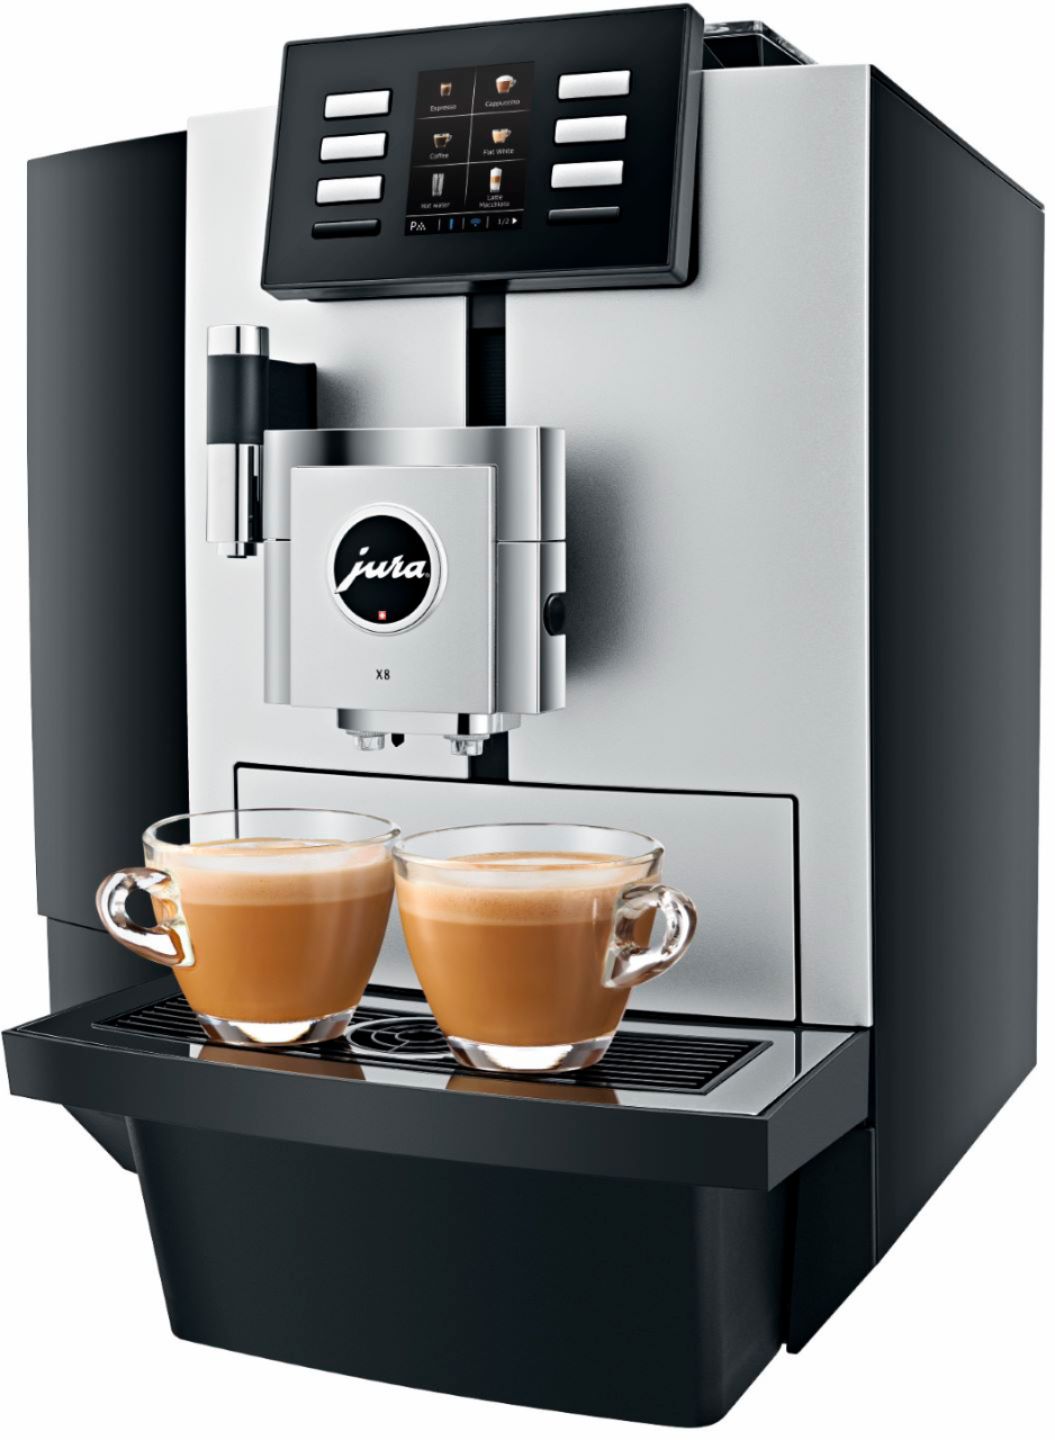 Jura - X8 Espresso Machine with 15 bars of pressure and intergrated grinder - Black and Chrome_10